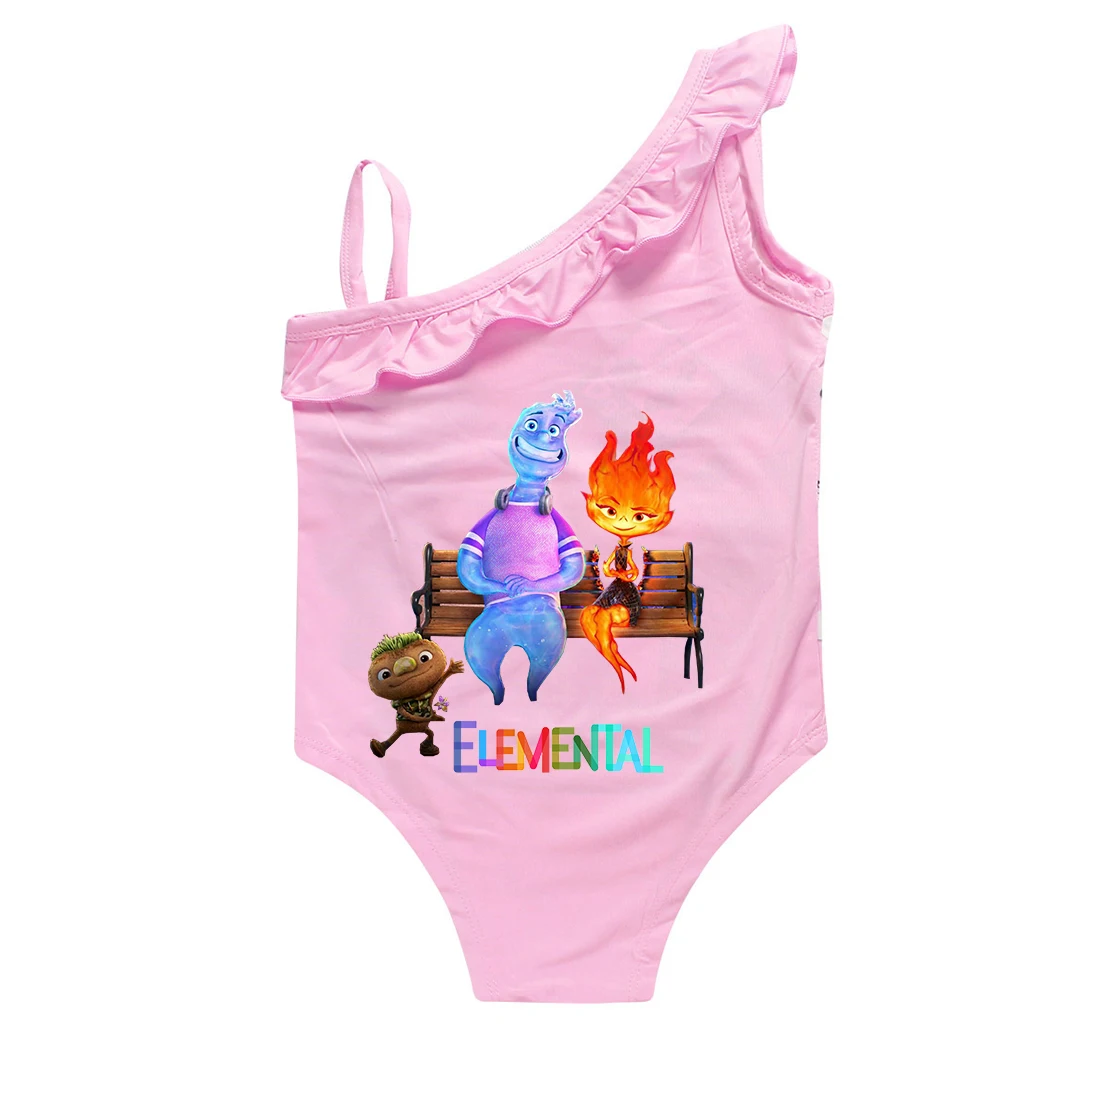 

Elemental 2-9Y Toddler Baby Swimsuit one piece Kids Girls Swimming outfit Children Swimwear Bathing suit